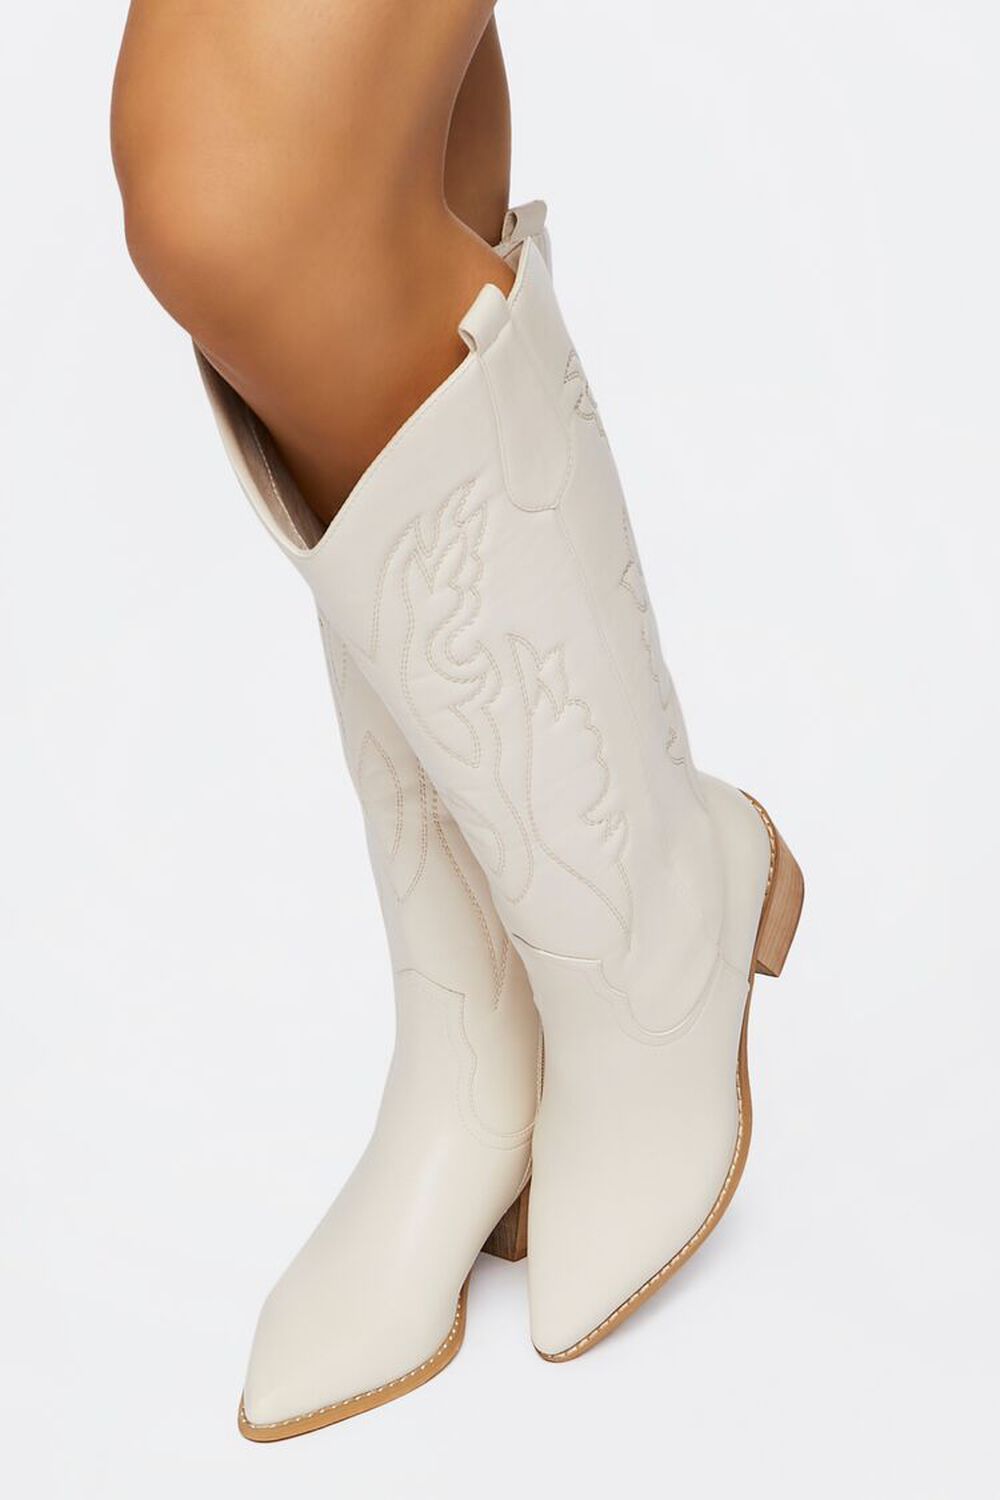 WHITE Faux Leather Cowboy Boots, image 1